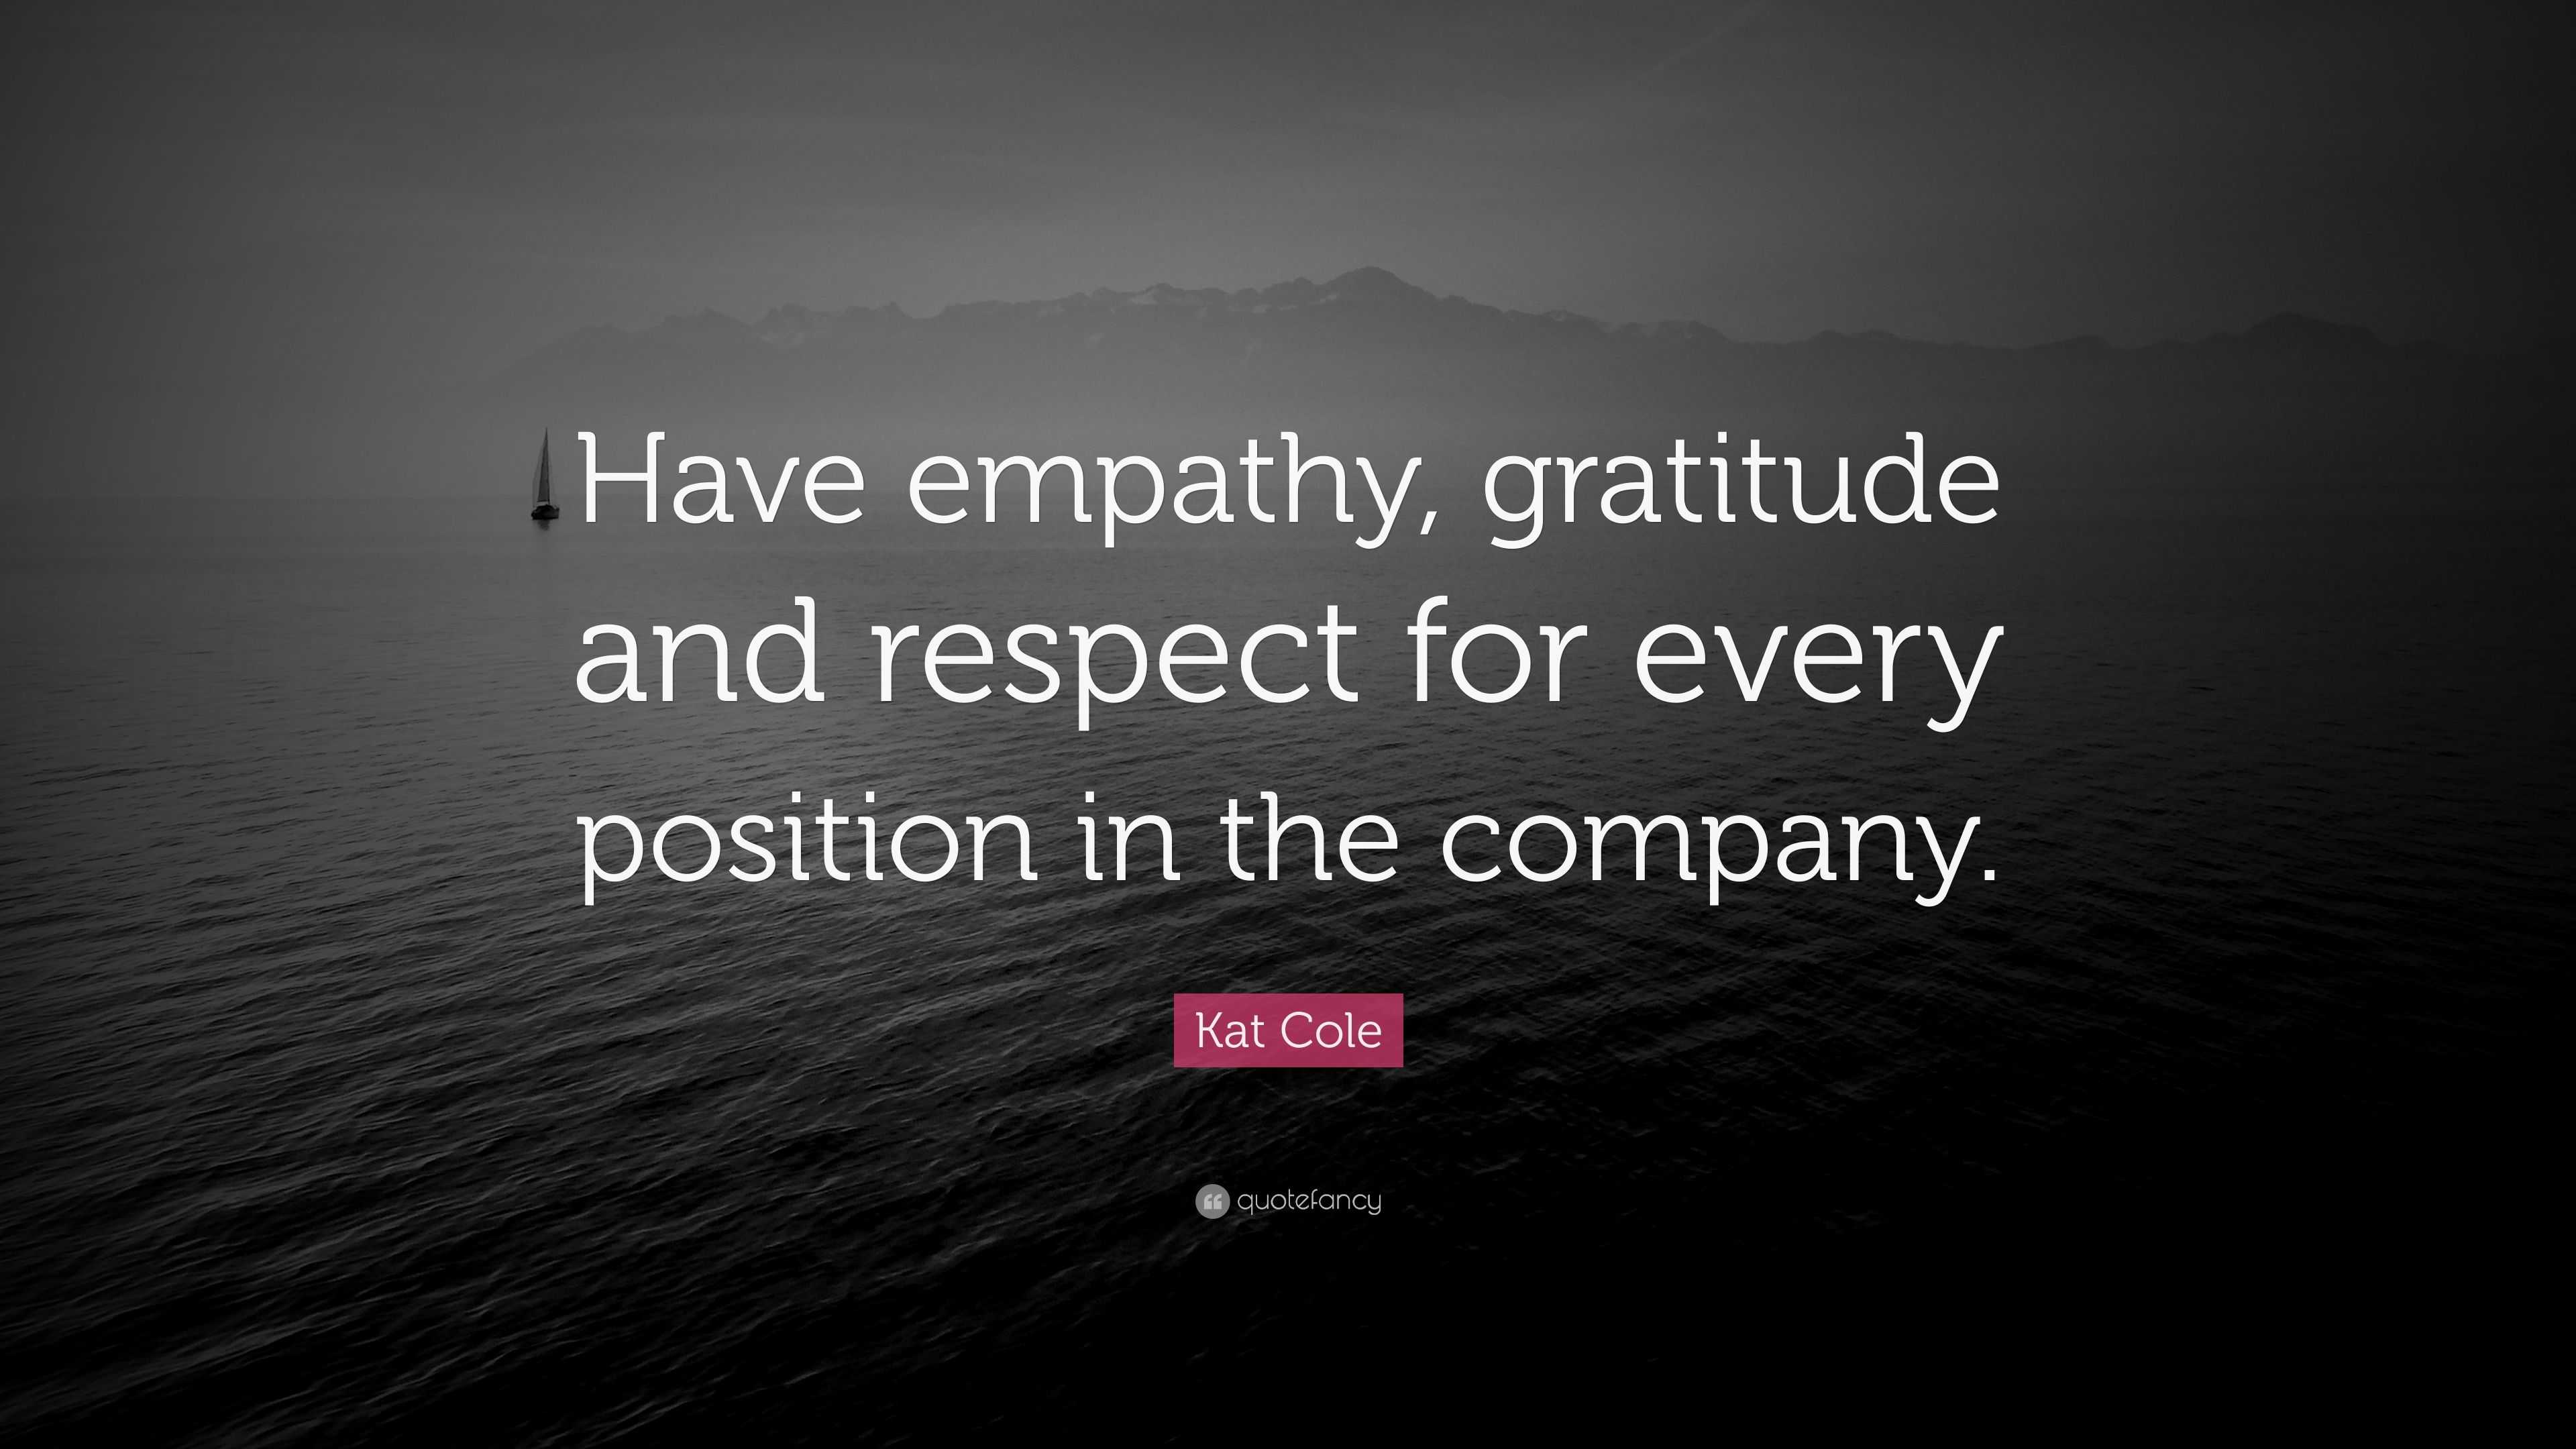 Kat Cole Quote: “Have empathy, gratitude and respect for every position